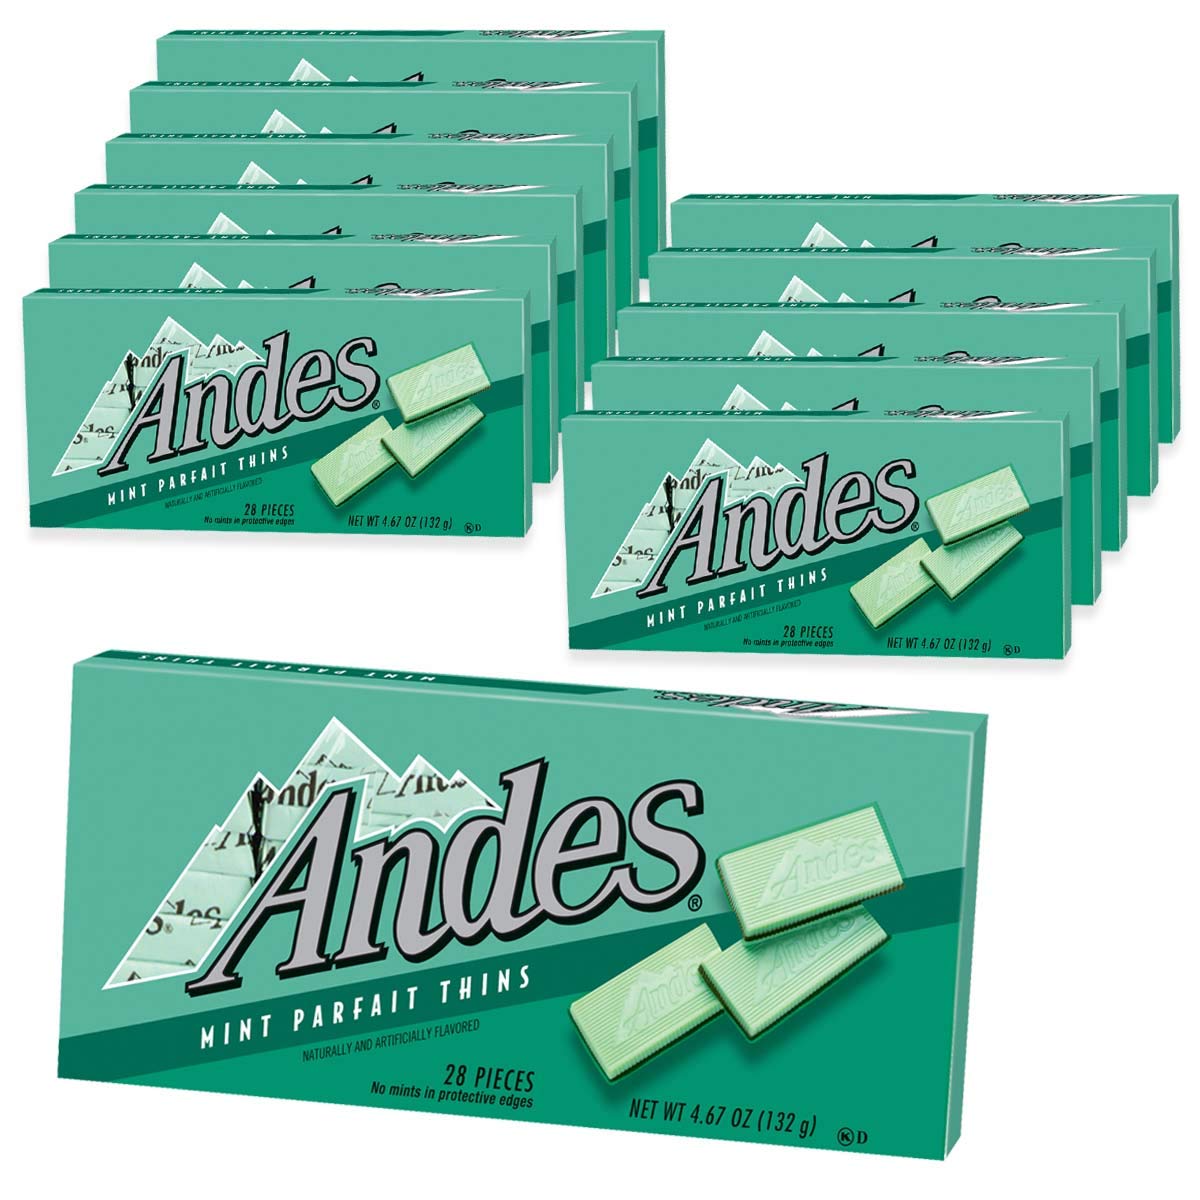 Charms-Andes Mint Parfait Thins 4.67 oz. Box-15355-12-Box of 12-Legacy Toys